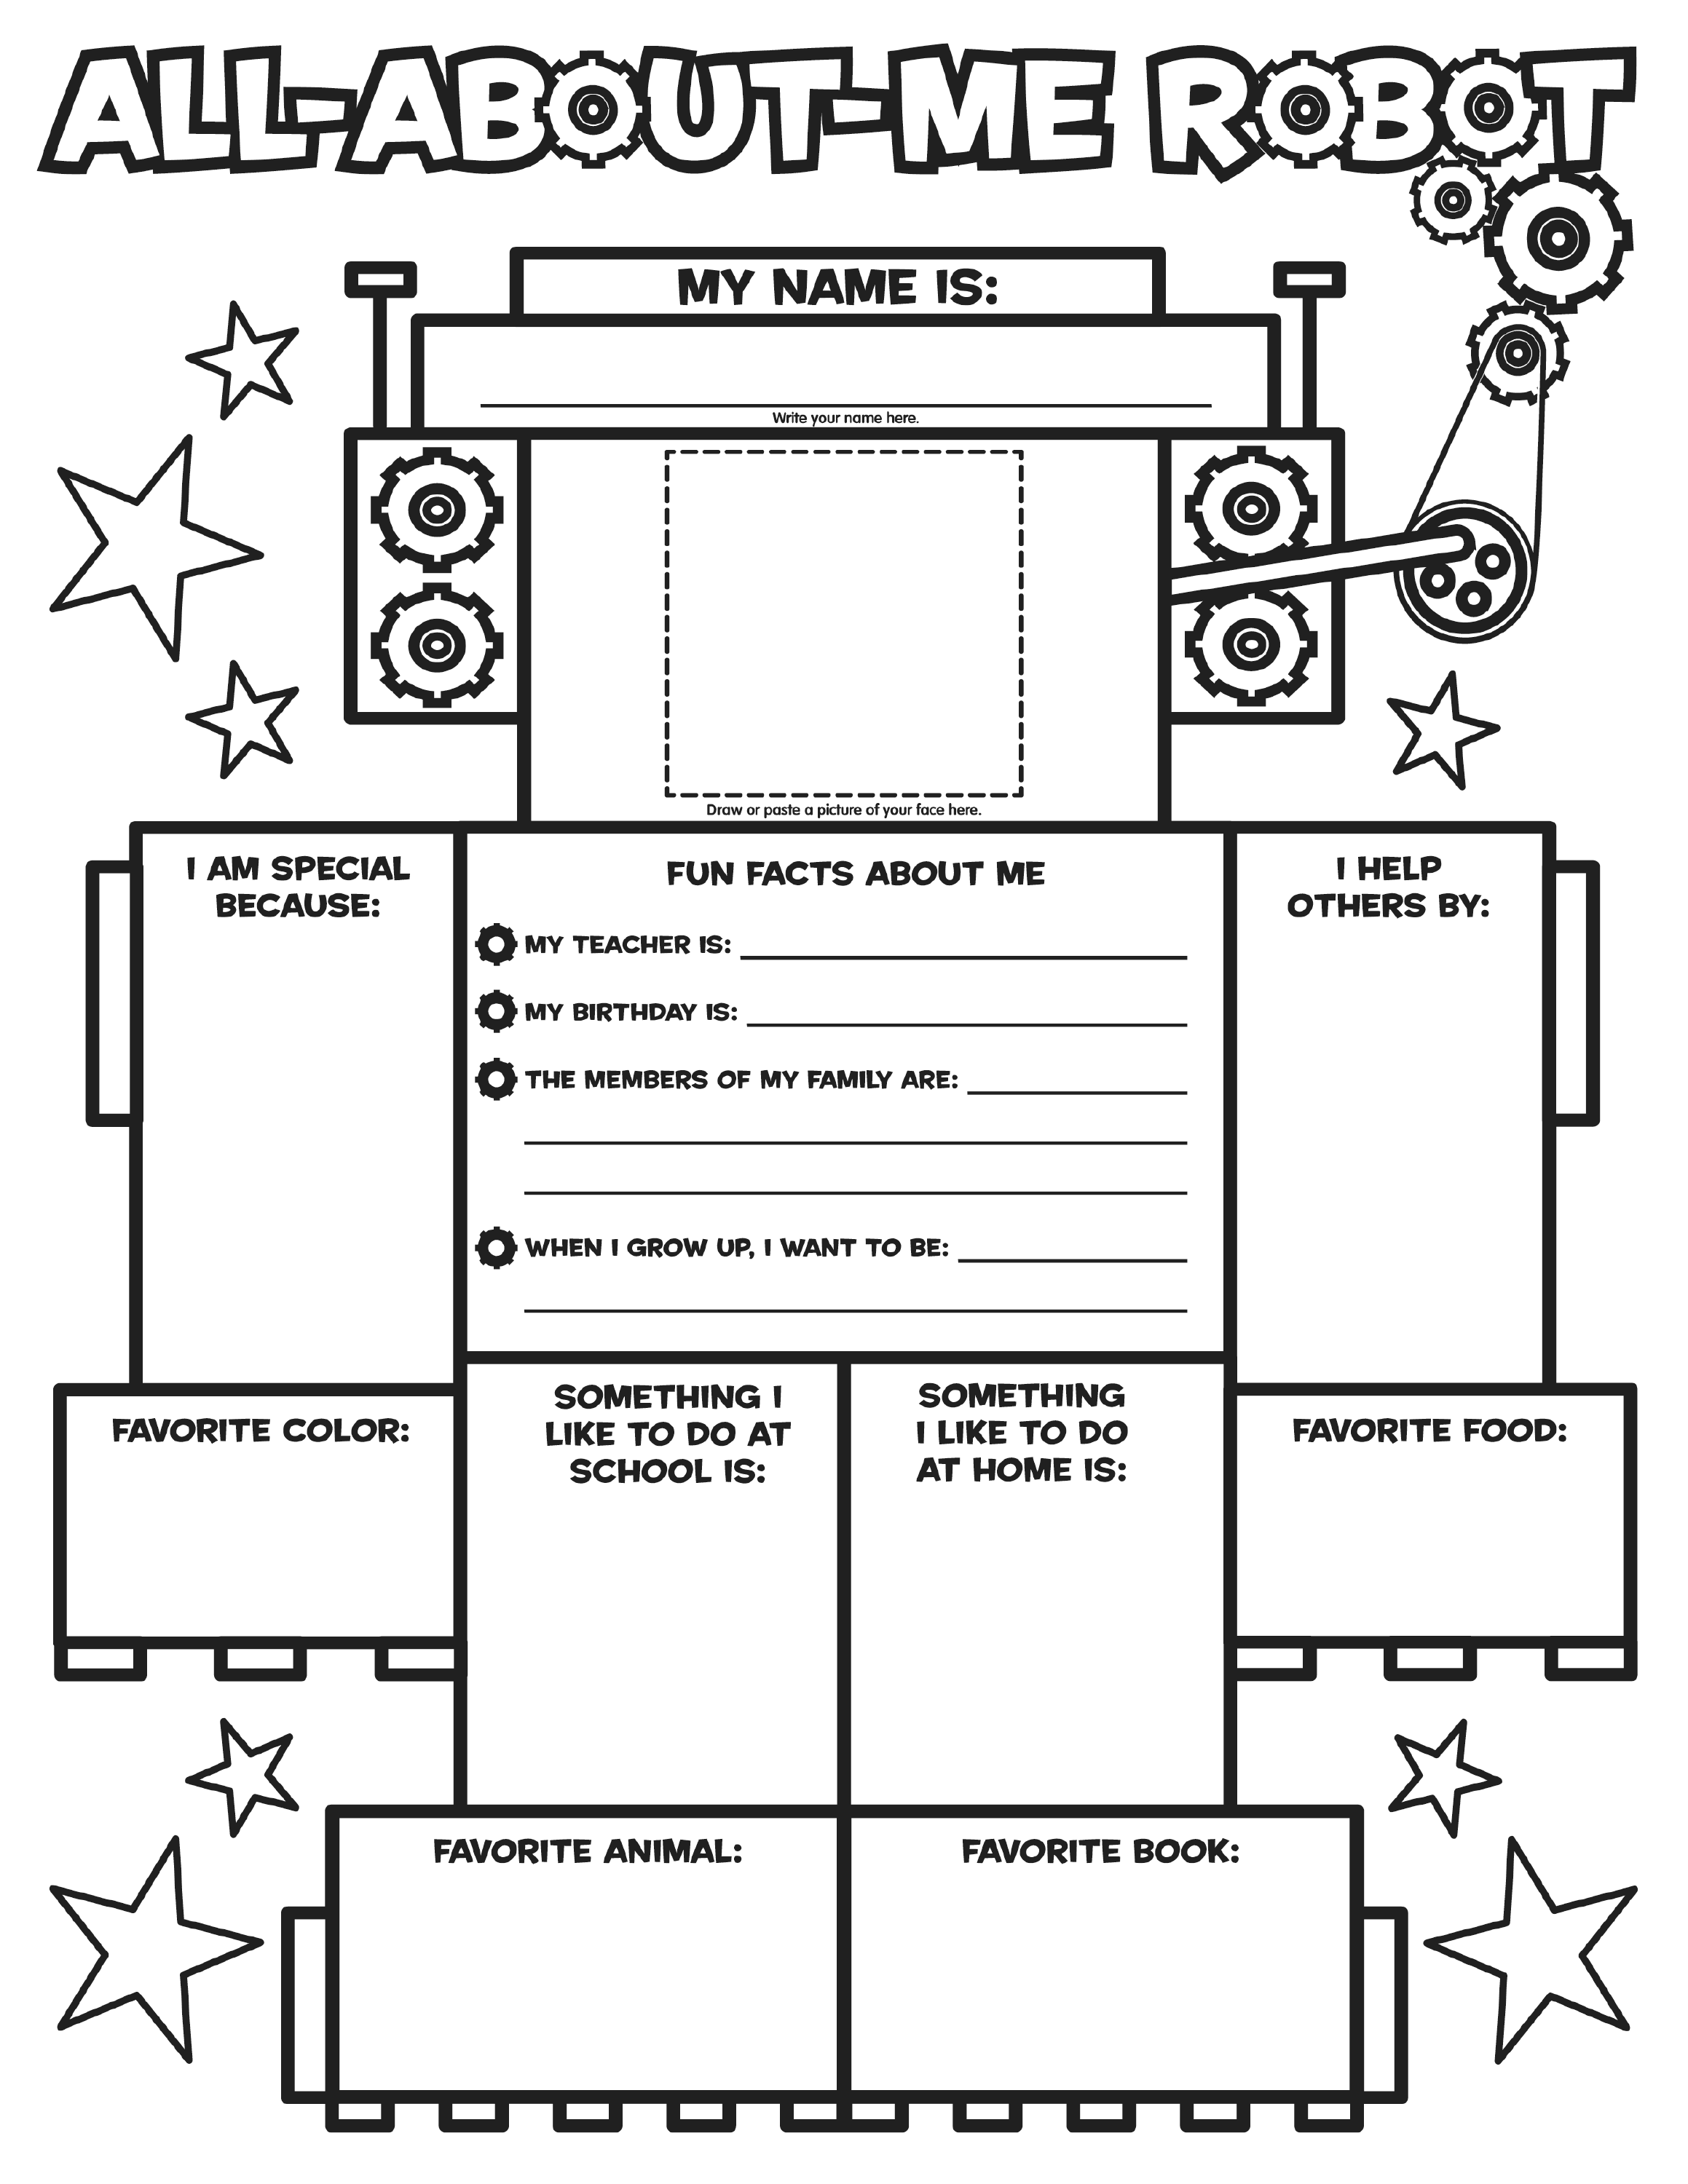 All about me robot coloring page